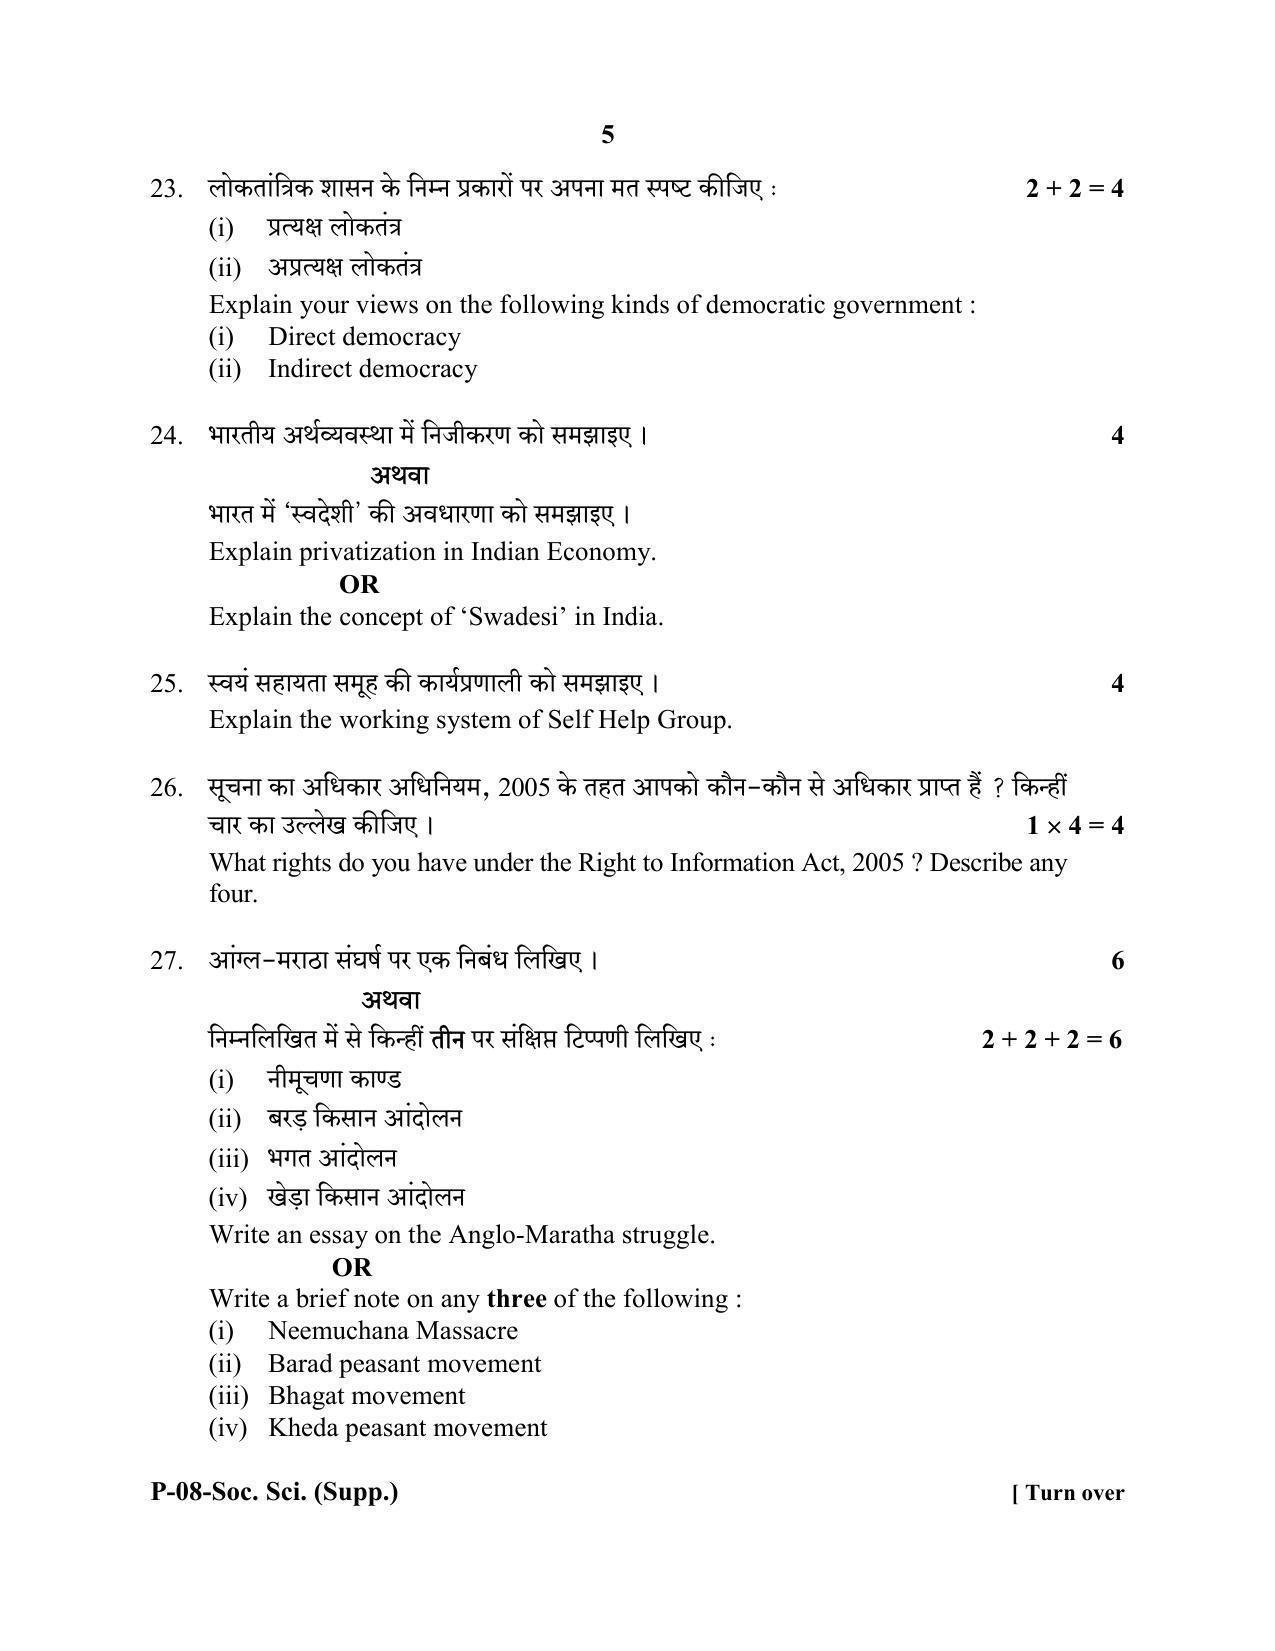 RBSE 2020 Social Science  (SUPPLEMENTARY) Praveshika Question Paper - Page 5